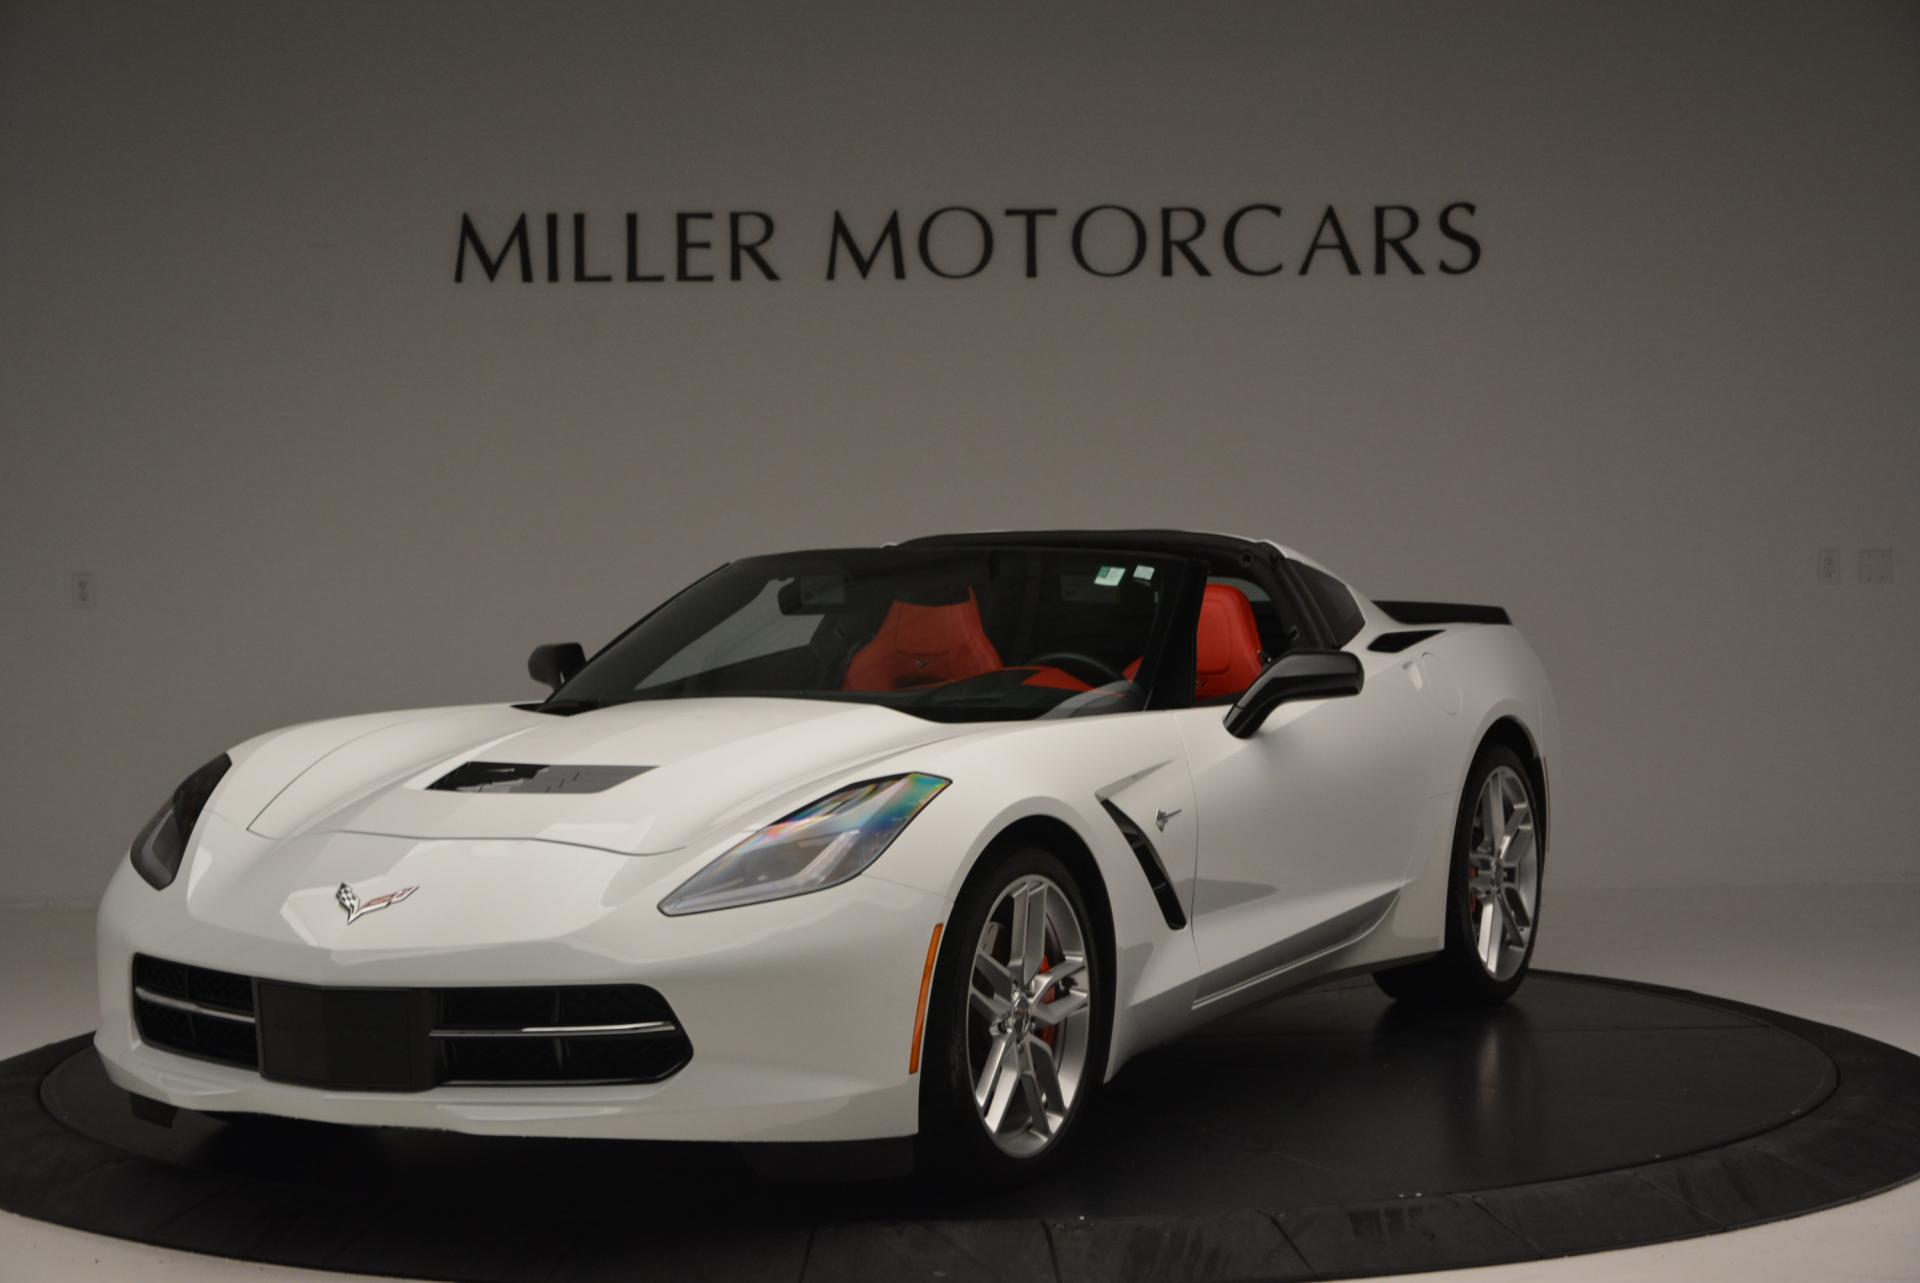 Used 2014 Chevrolet Corvette Stingray Z51 for sale Sold at Aston Martin of Greenwich in Greenwich CT 06830 1